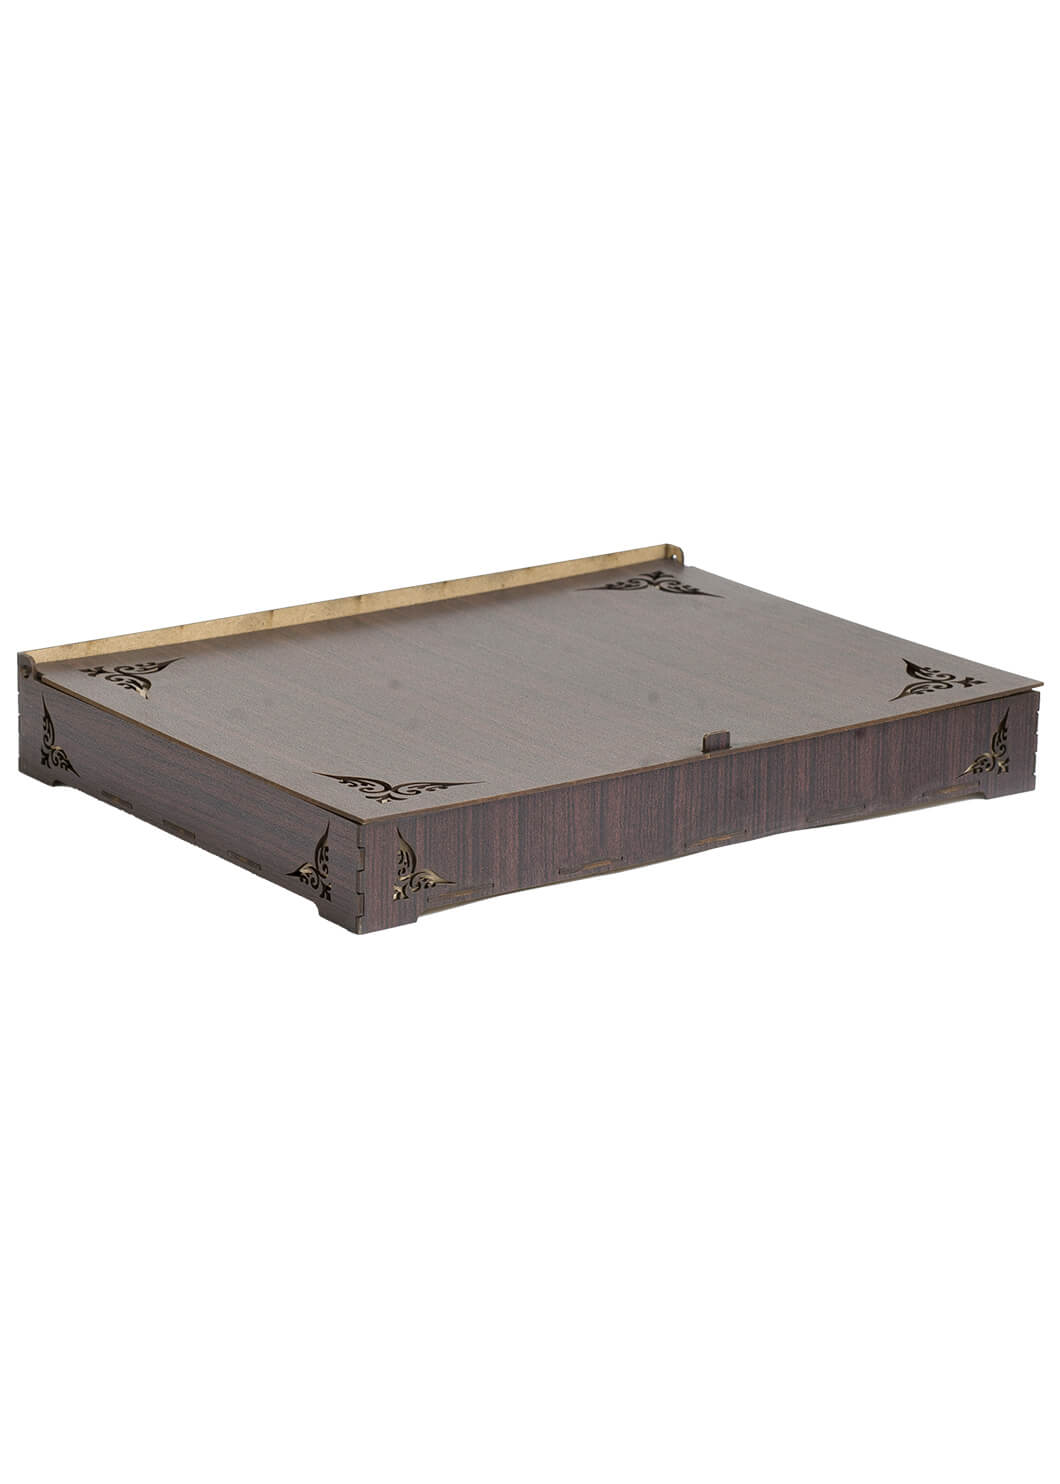 Premium Wooden Box for Packing Clothes and Fabrics